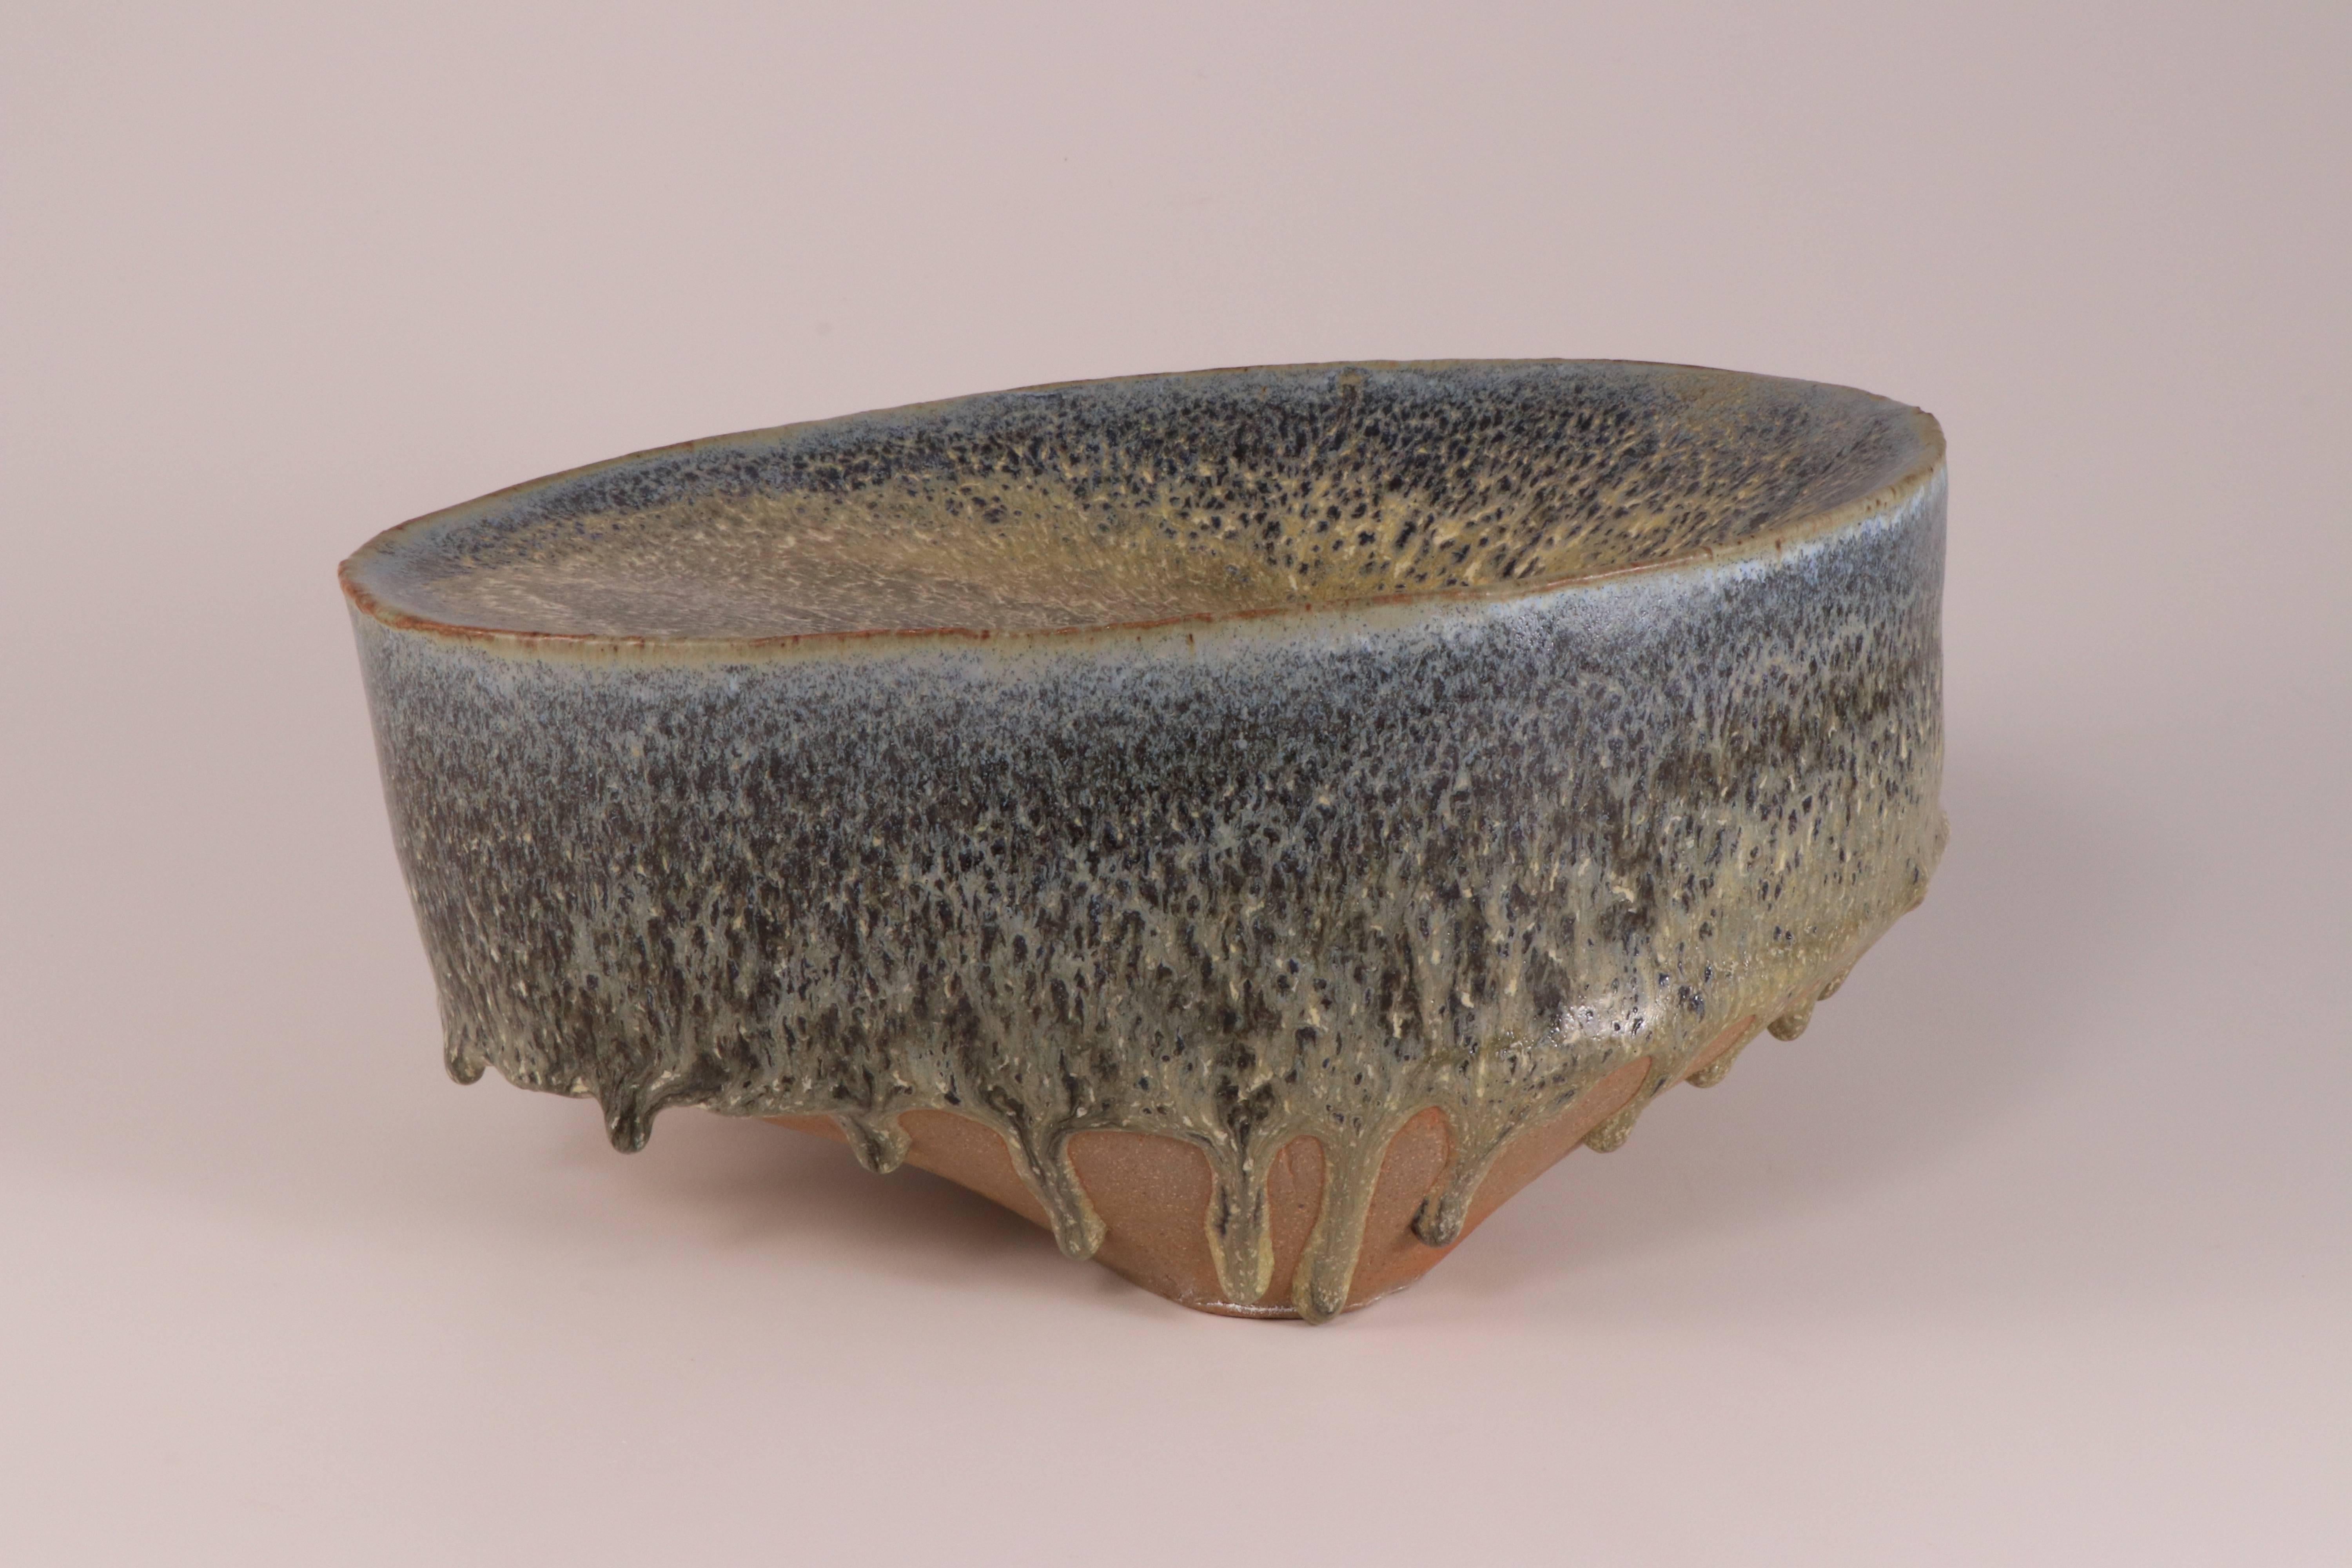 Glazed fired stoneware.

Contemporary ceramicist Brian Molanphy is inspired by the peaks and valleys seen on mountainous hikes. He plays with glazes and firing methods to create unique, contemporary end results that are different for each piece.